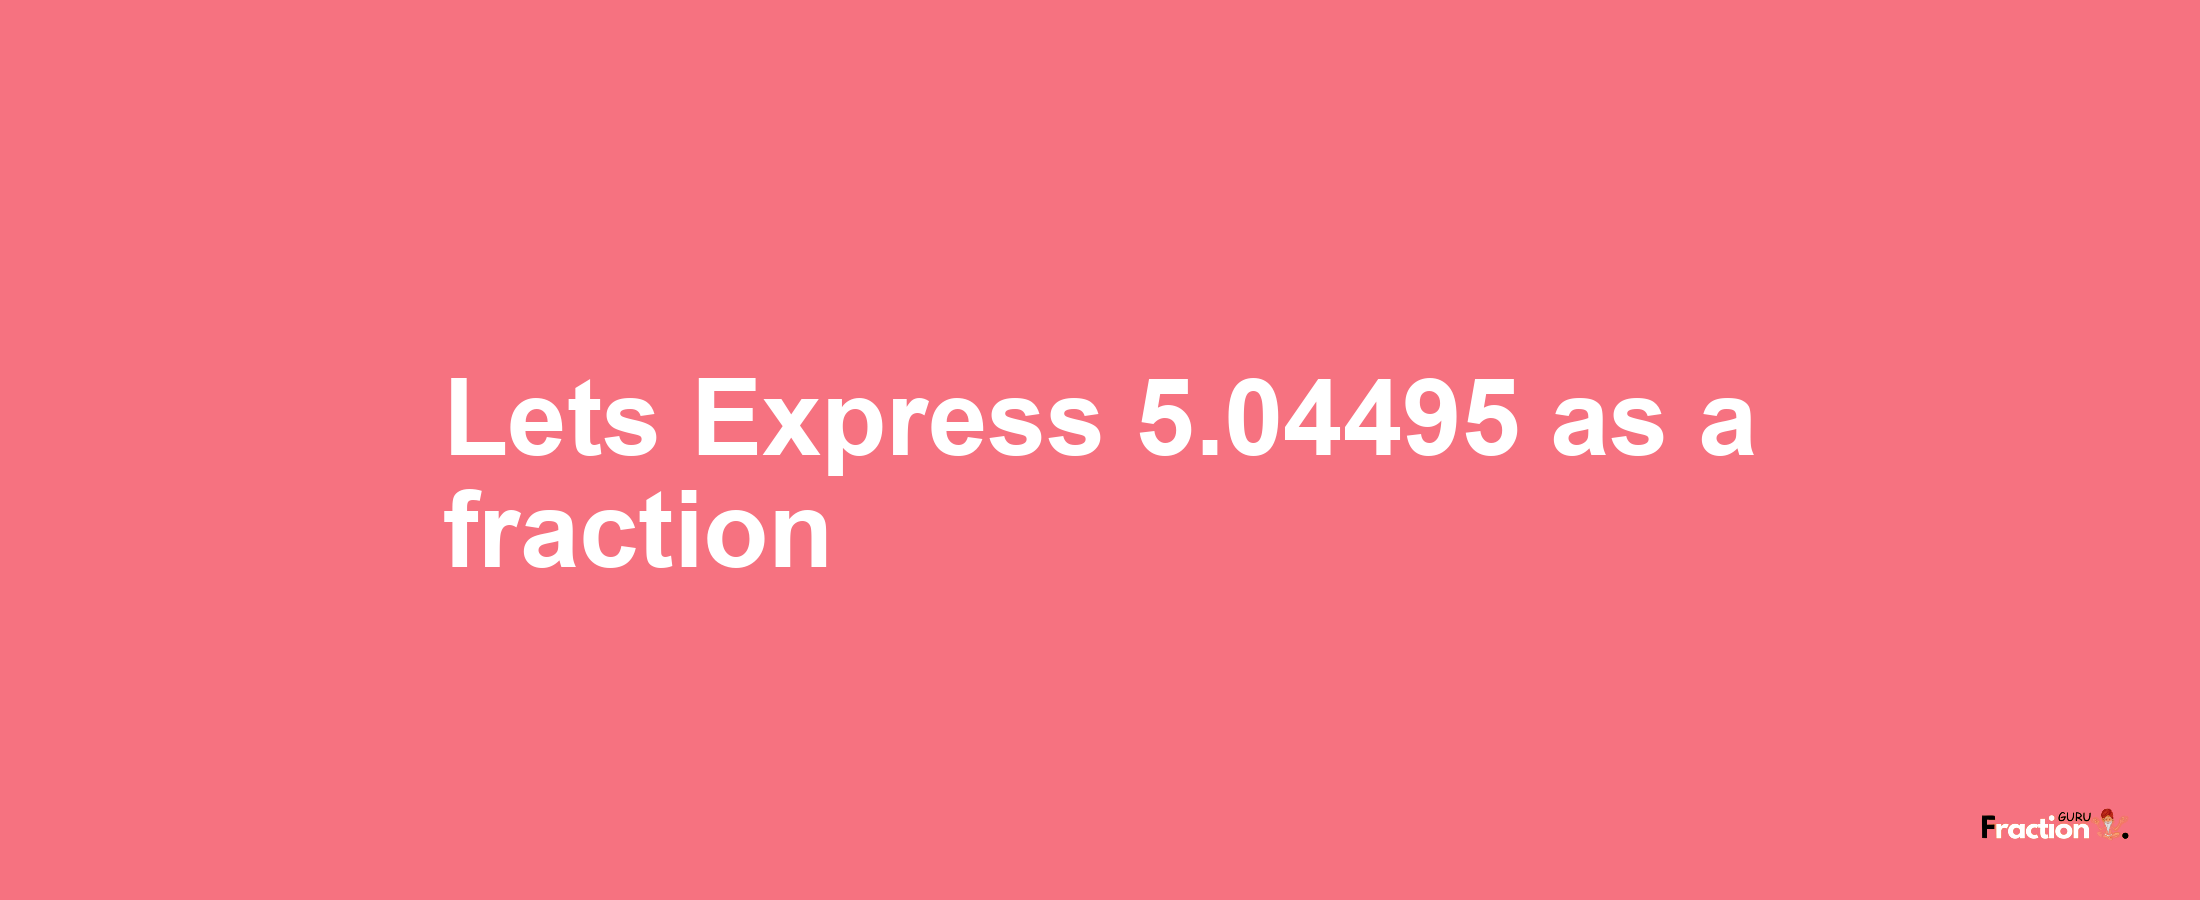 Lets Express 5.04495 as afraction